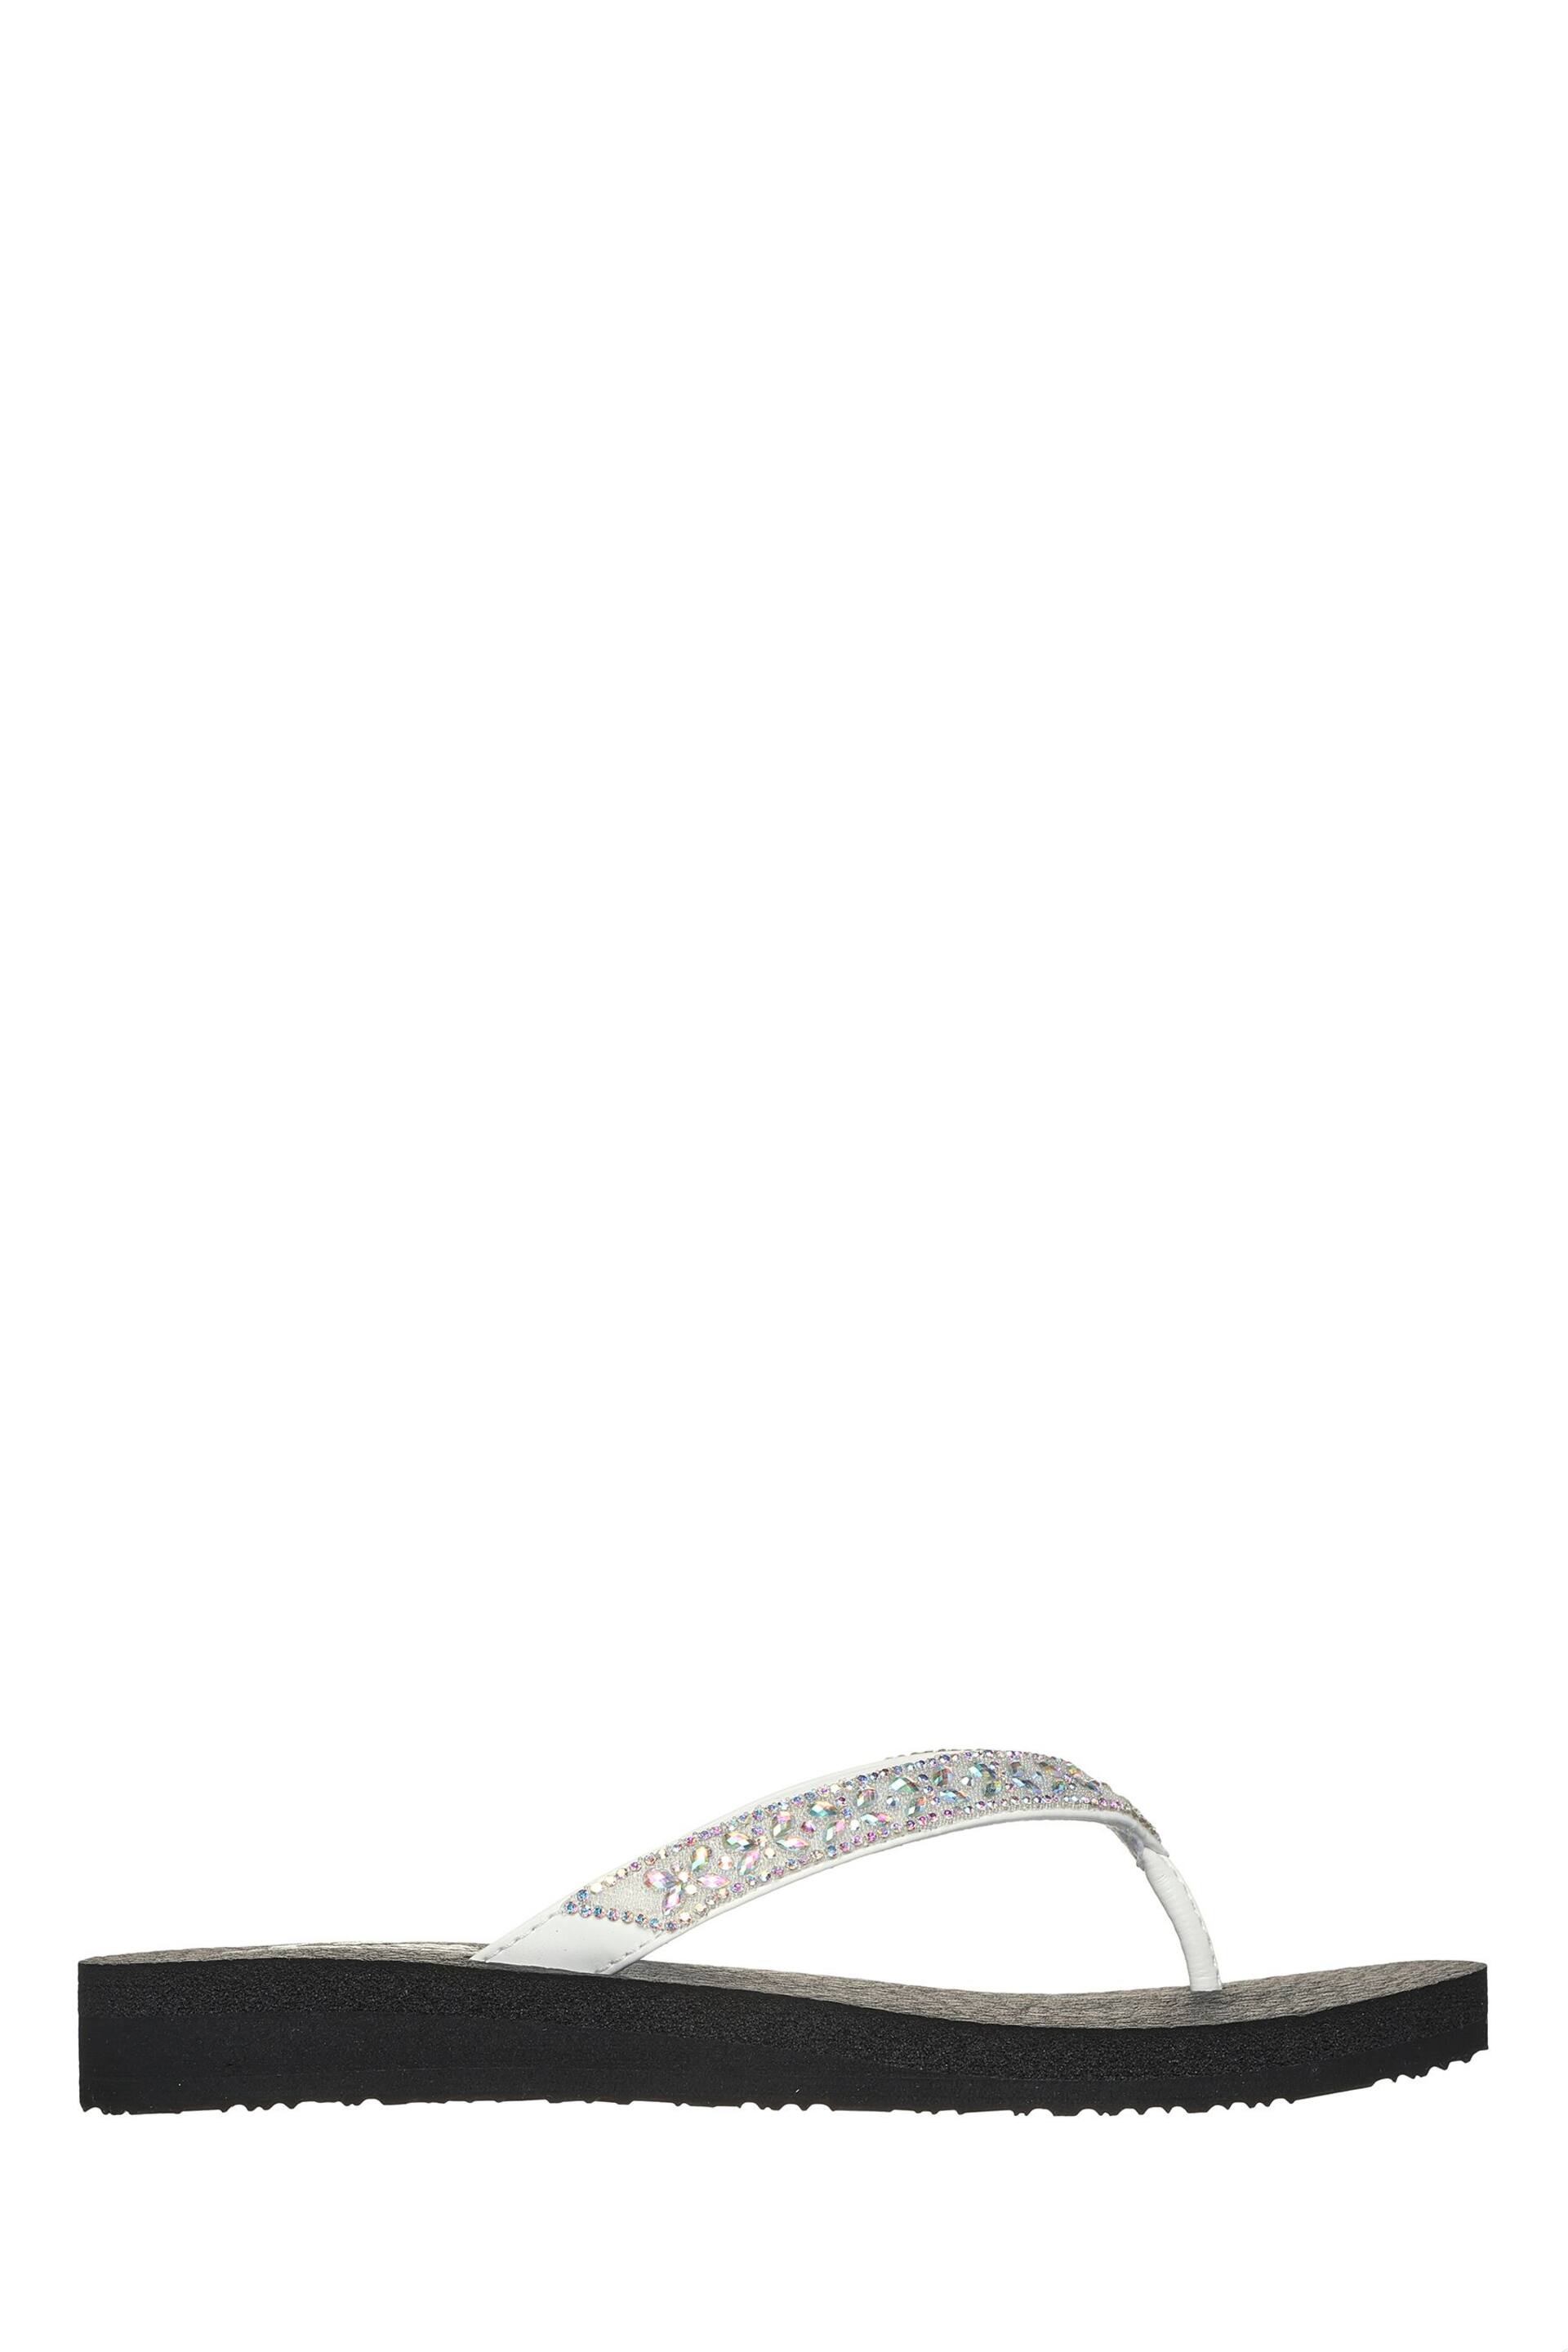 Skechers White Meditation Dancing Daisy Womens Sandals - Image 1 of 5